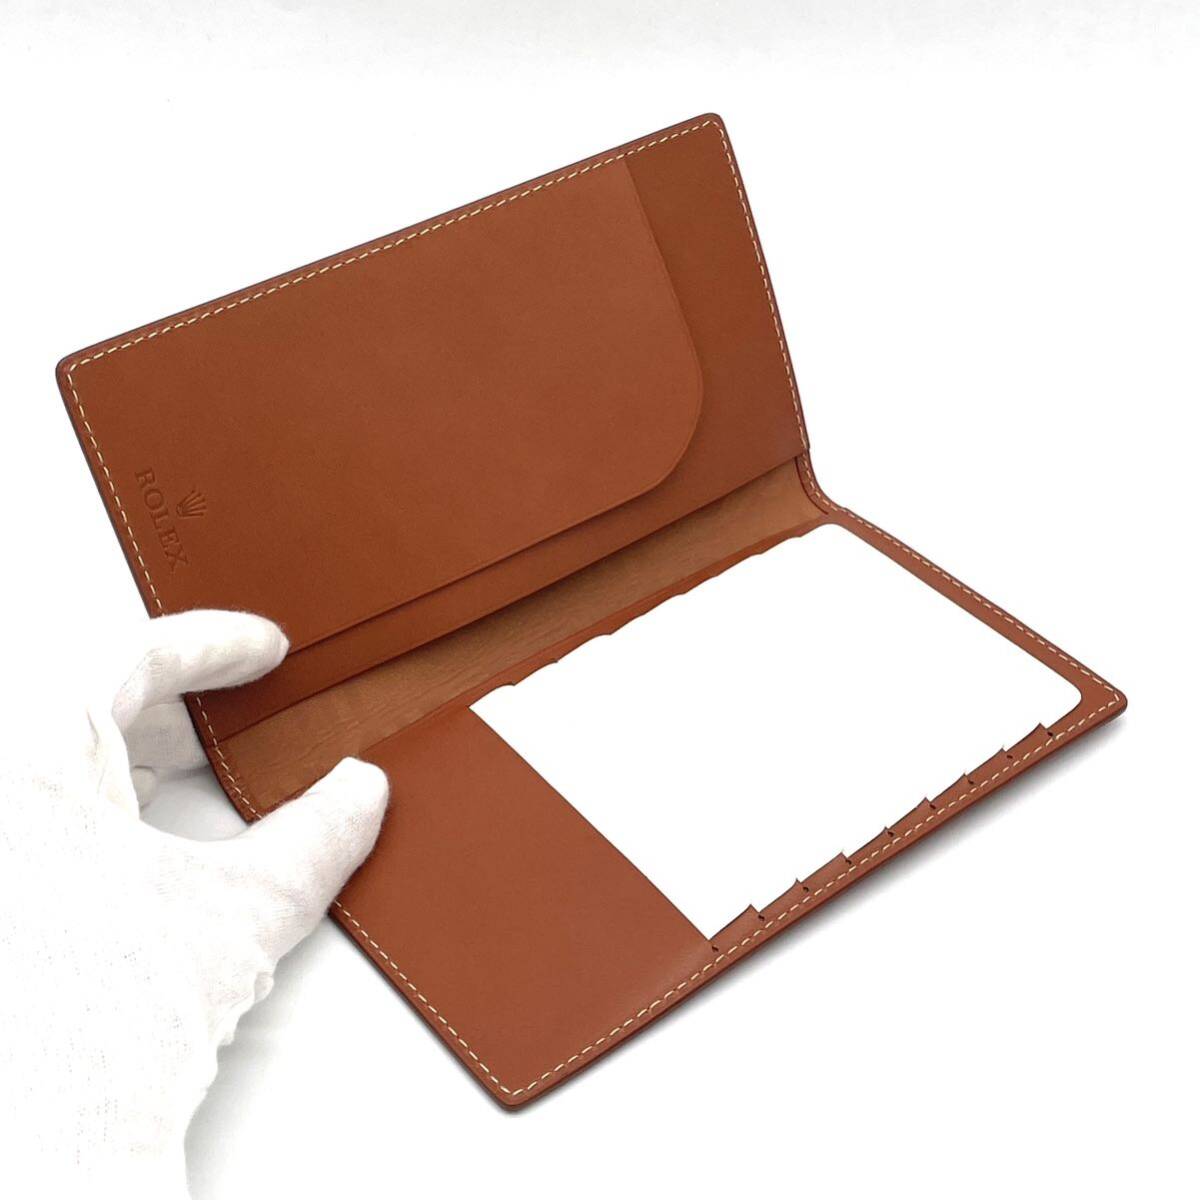 1 jpy unused storage goods ROLEX Rolex leather 2. folding . inserting card-case purse Brown natural 